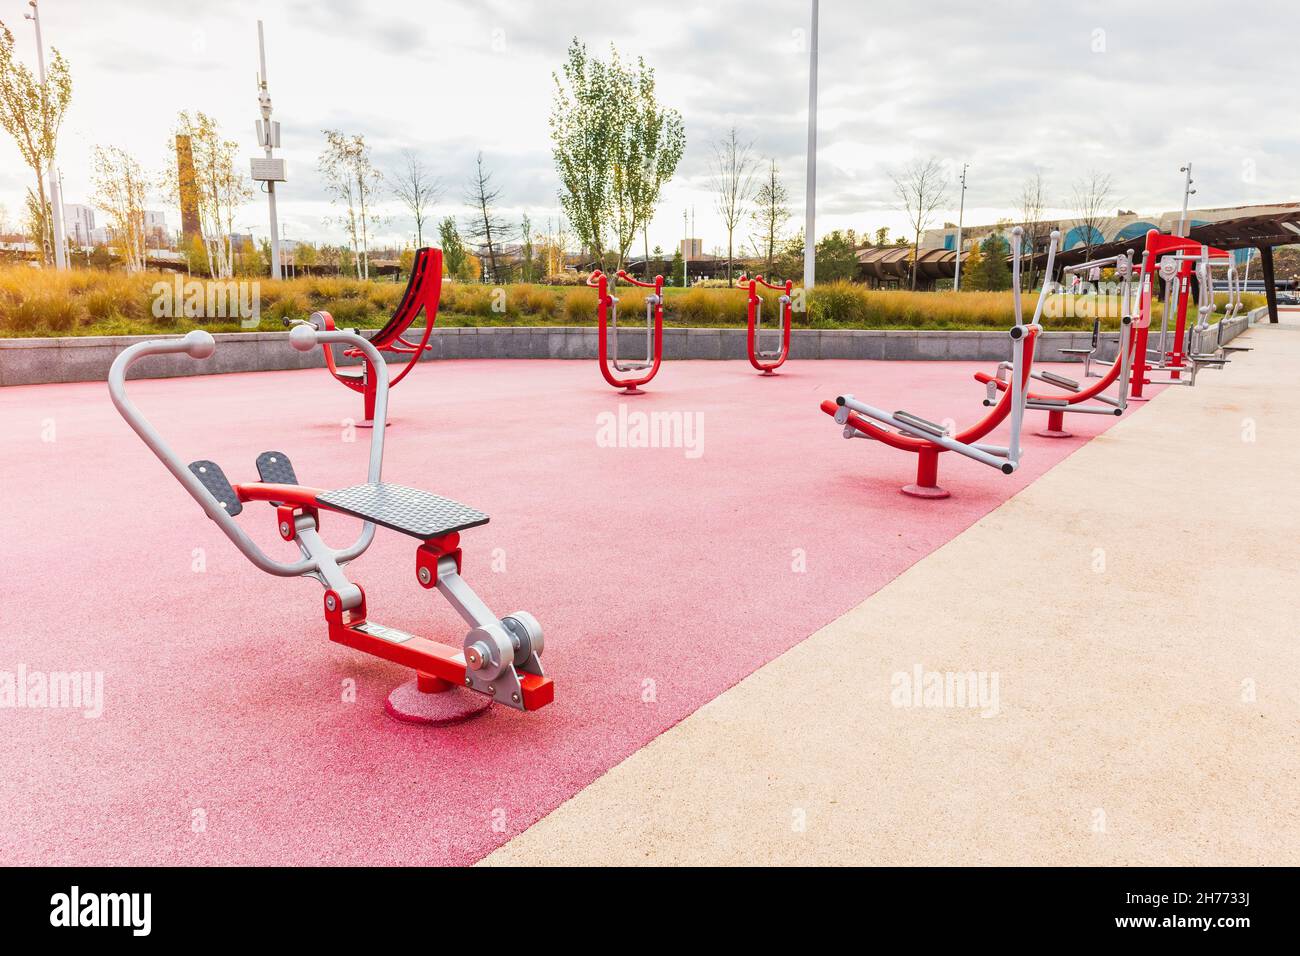 https://c8.alamy.com/comp/2H7733J/street-gym-outdoor-fitness-with-exercise-equipment-pink-colorconcept-street-gym-sport-2H7733J.jpg